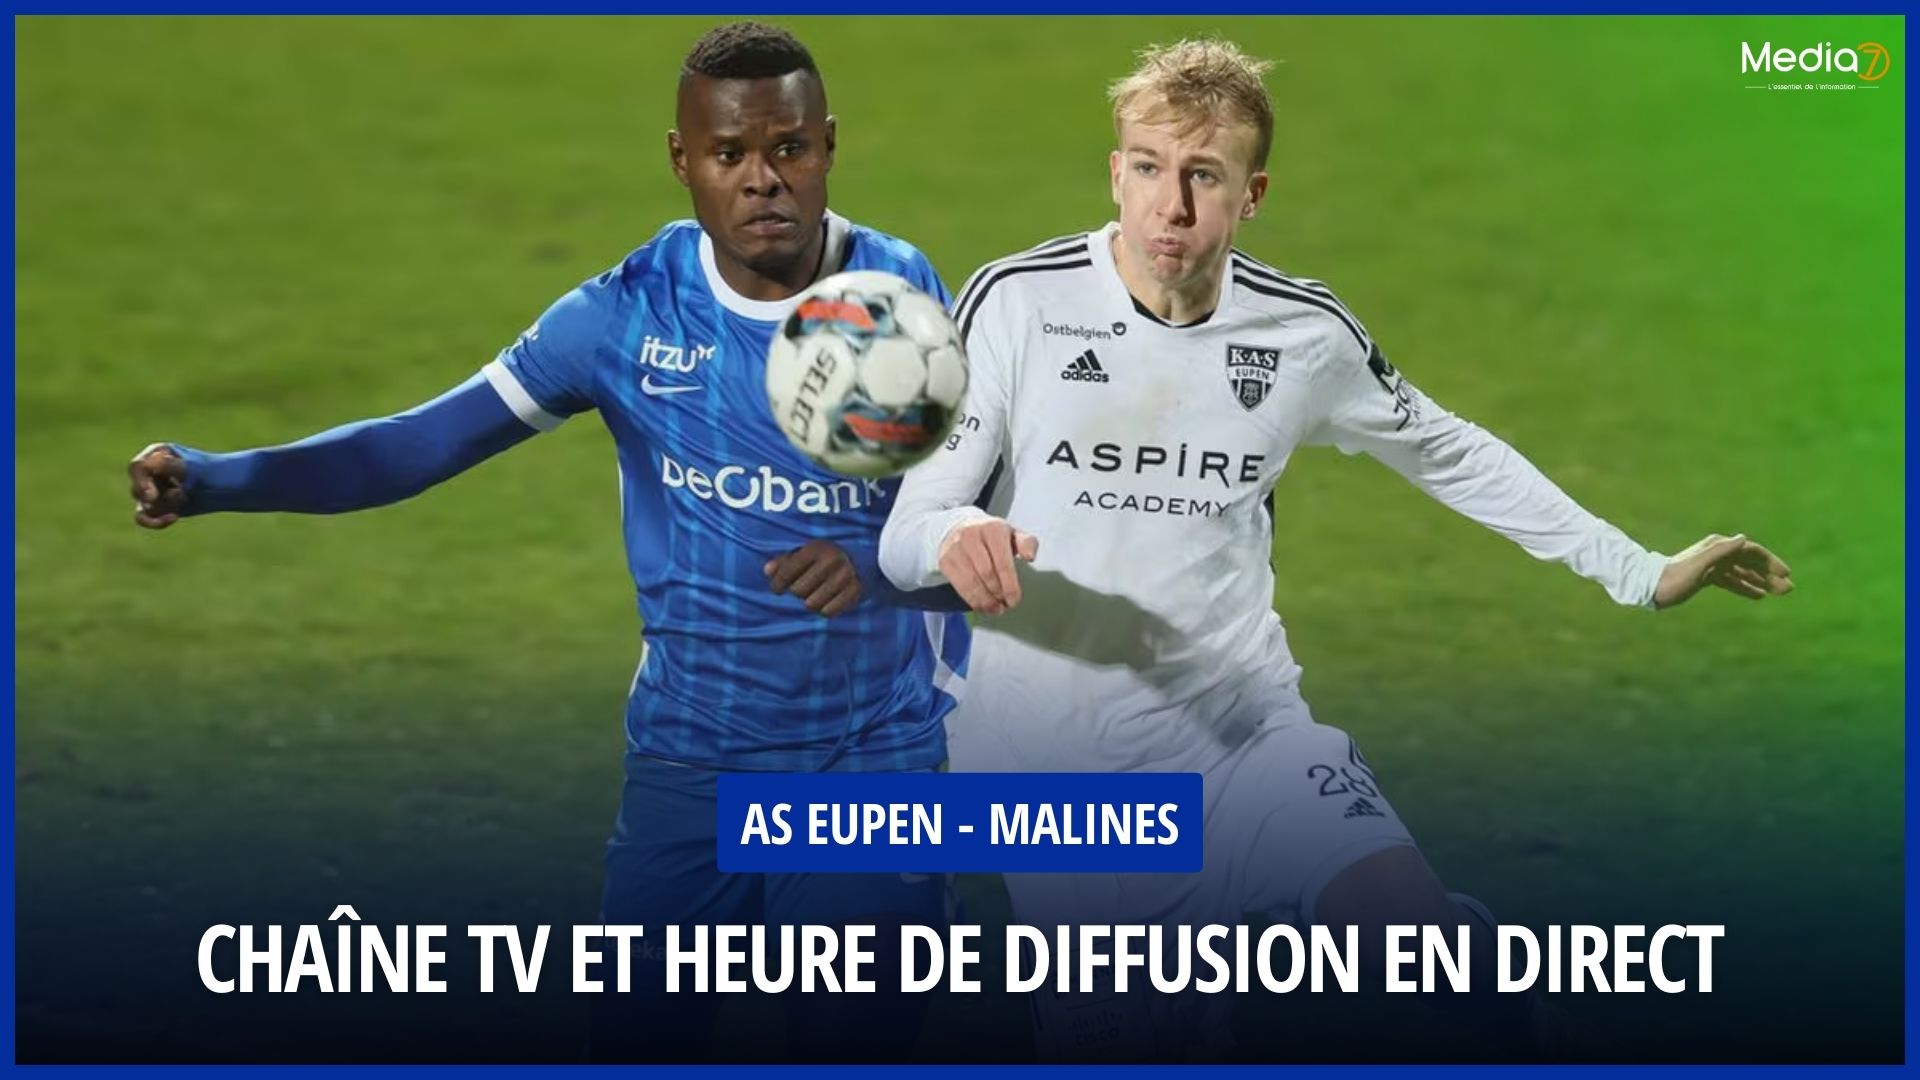 Live Broadcast: AS Eupen - Mechelen: Where to Watch the Match Live and Streaming? What is the Kick-Off Time? - Media7